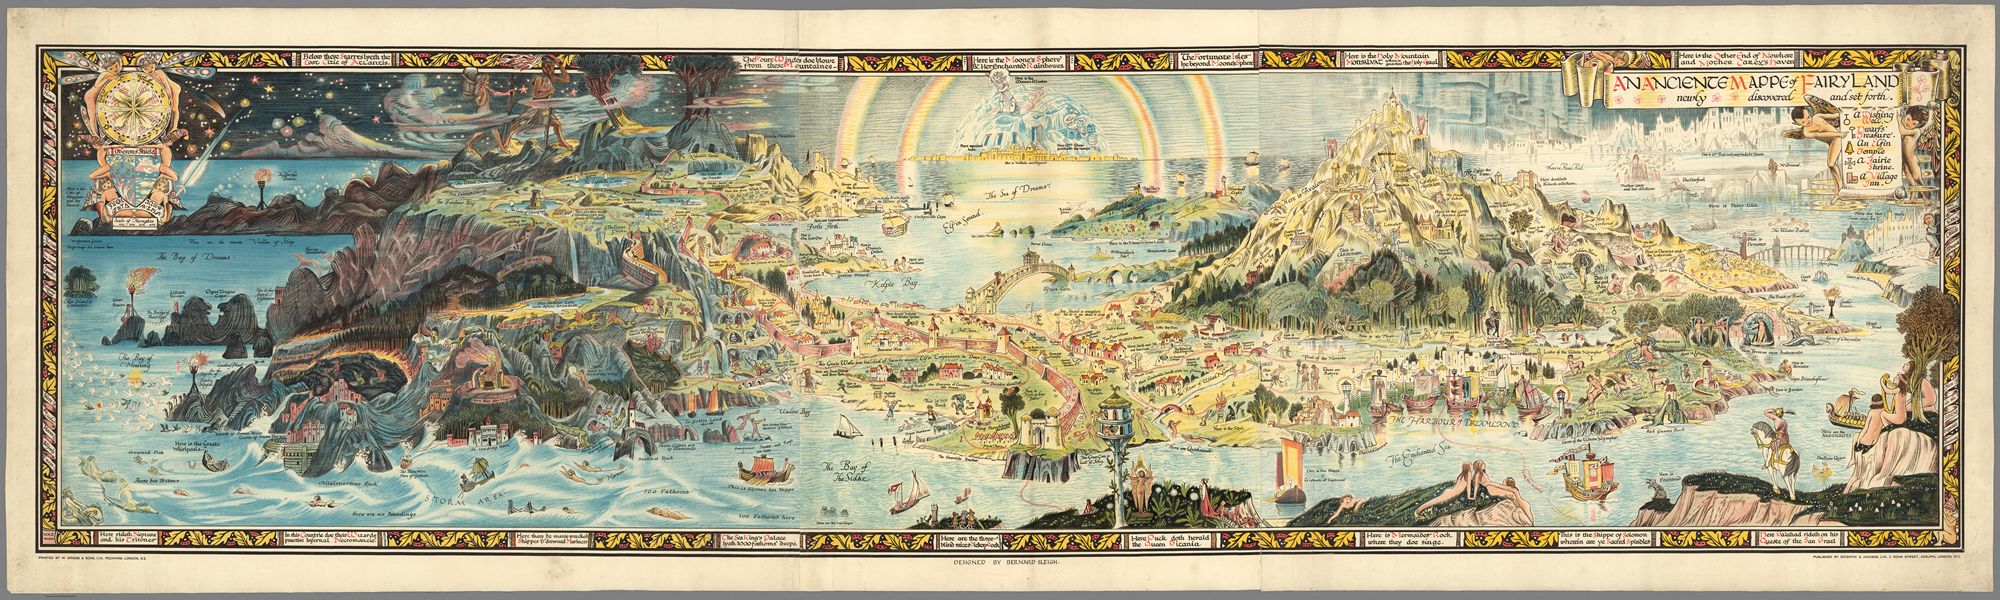 An Ancient Mappe of Fairyland : Newly discovered and set forth. Designed by Bernard Sleigh